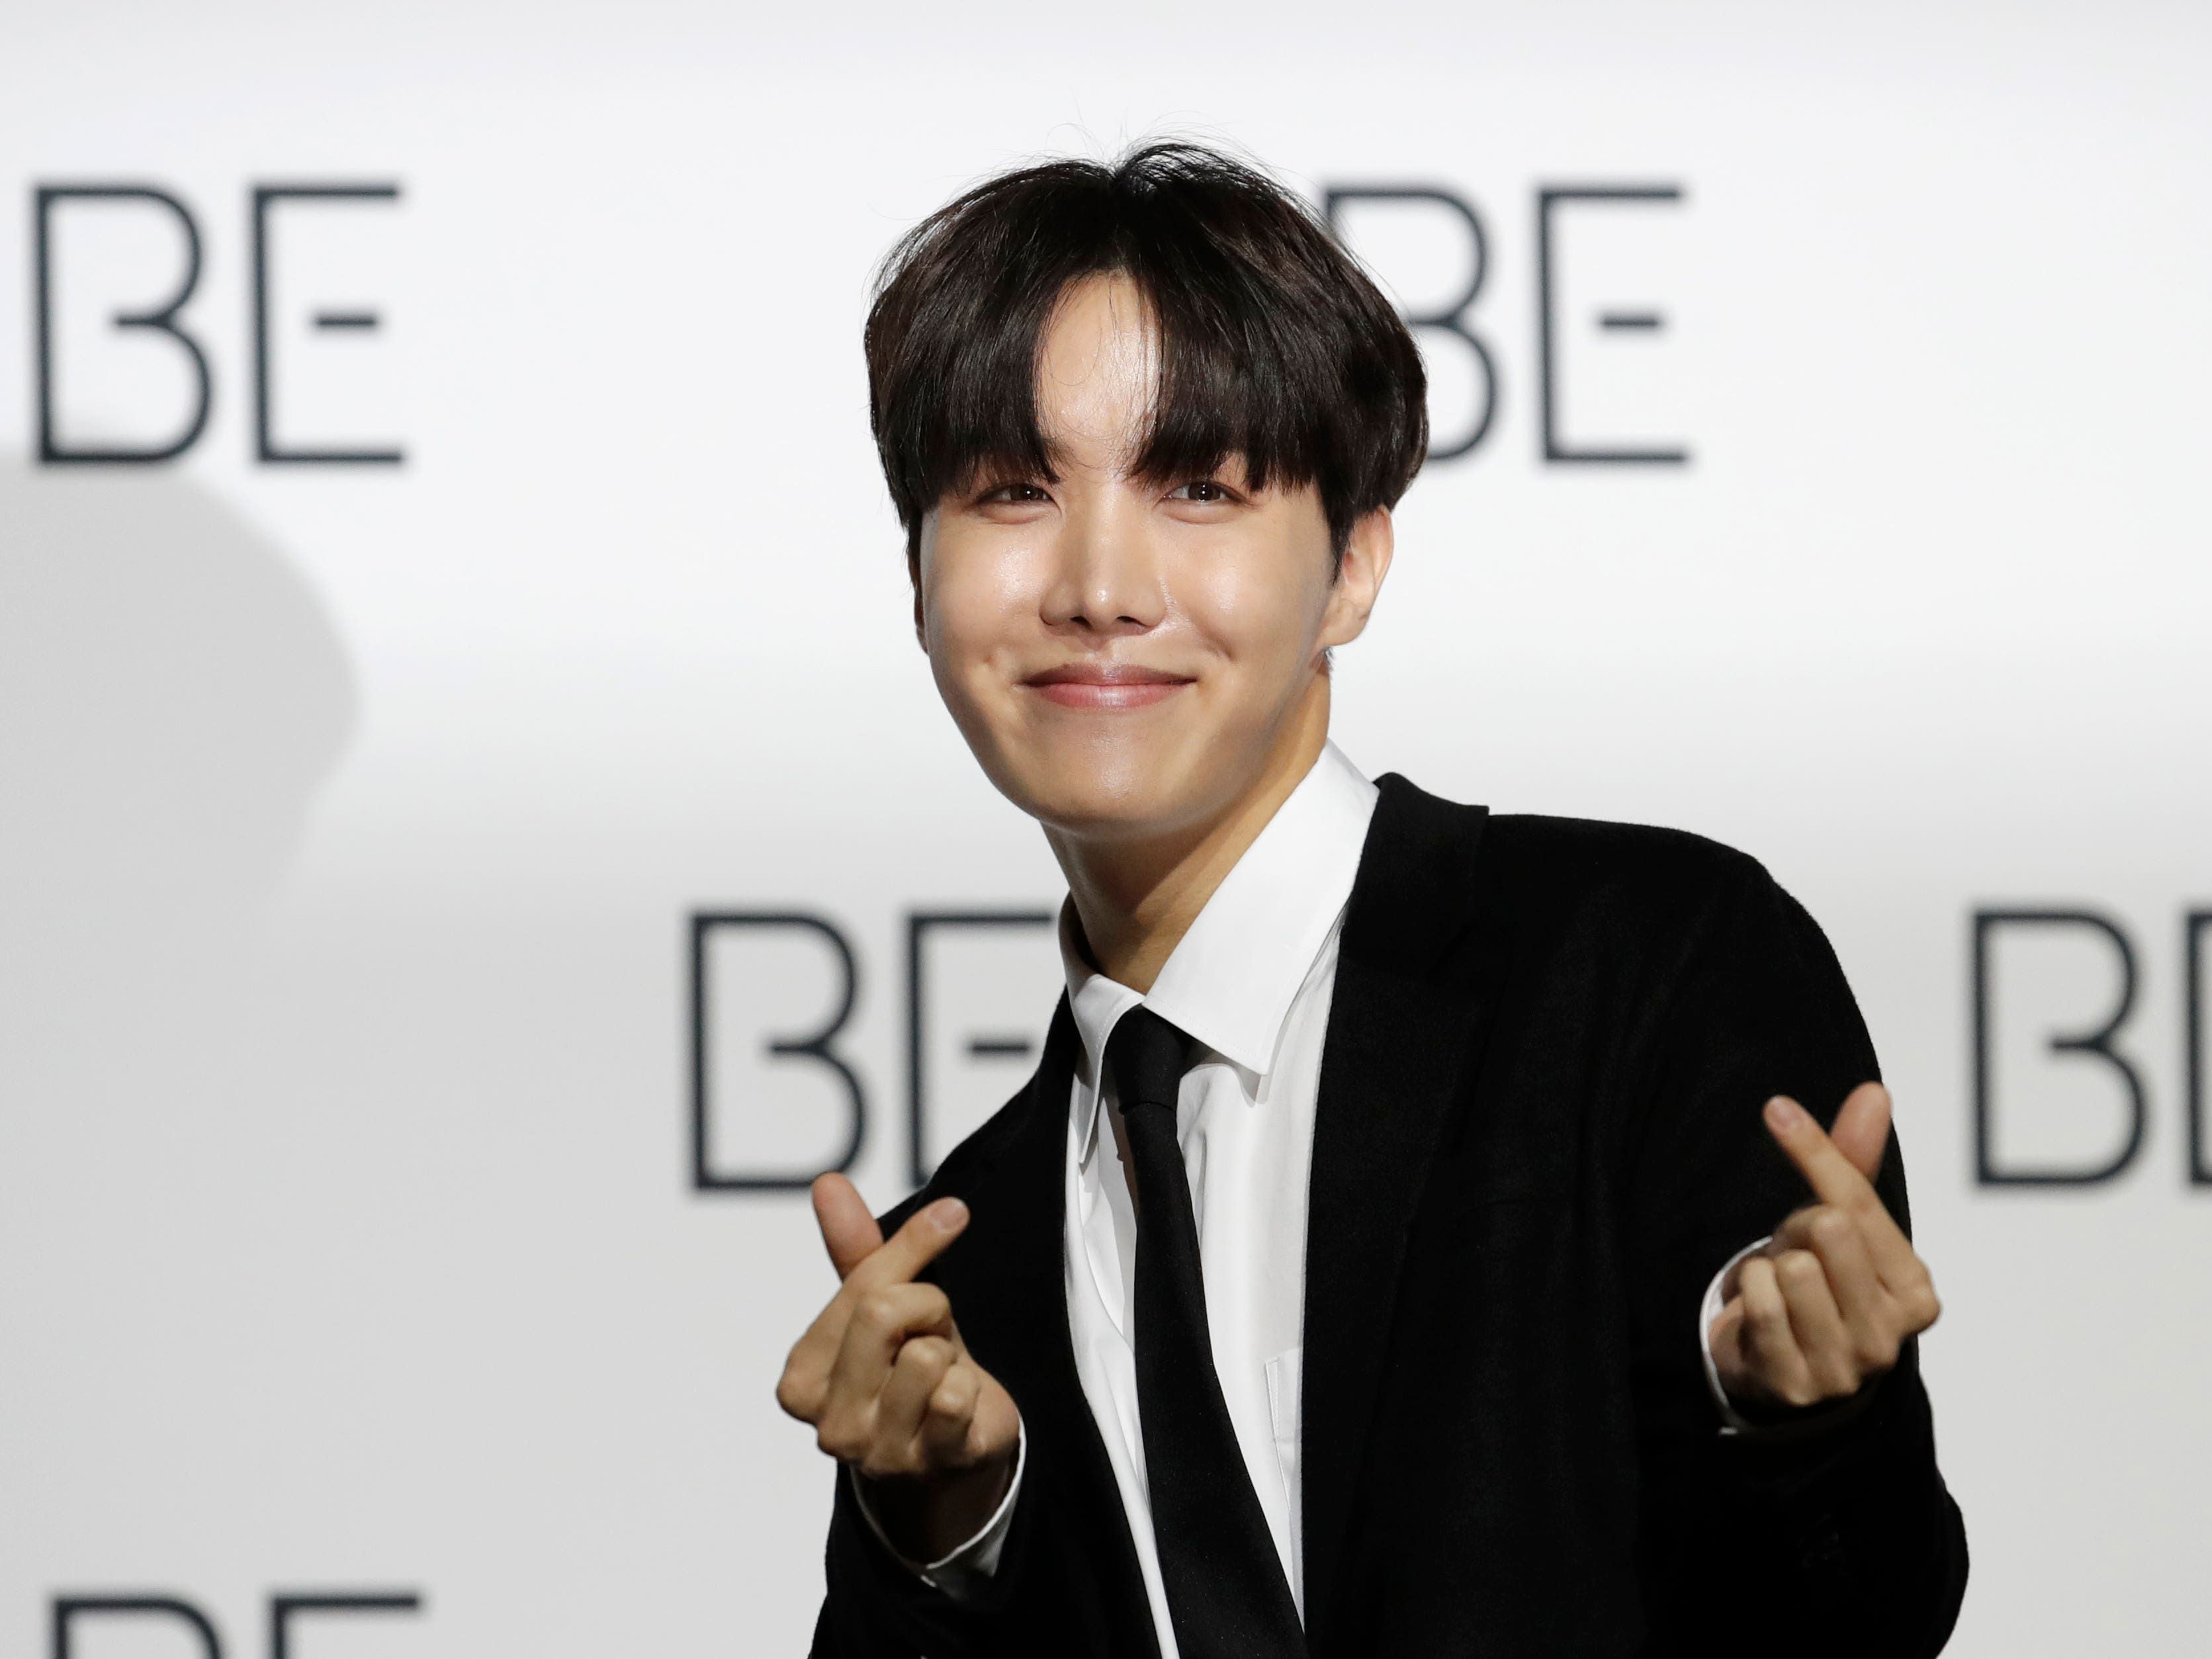 J-Hope becomes second BTS member to begin military service in South Korea